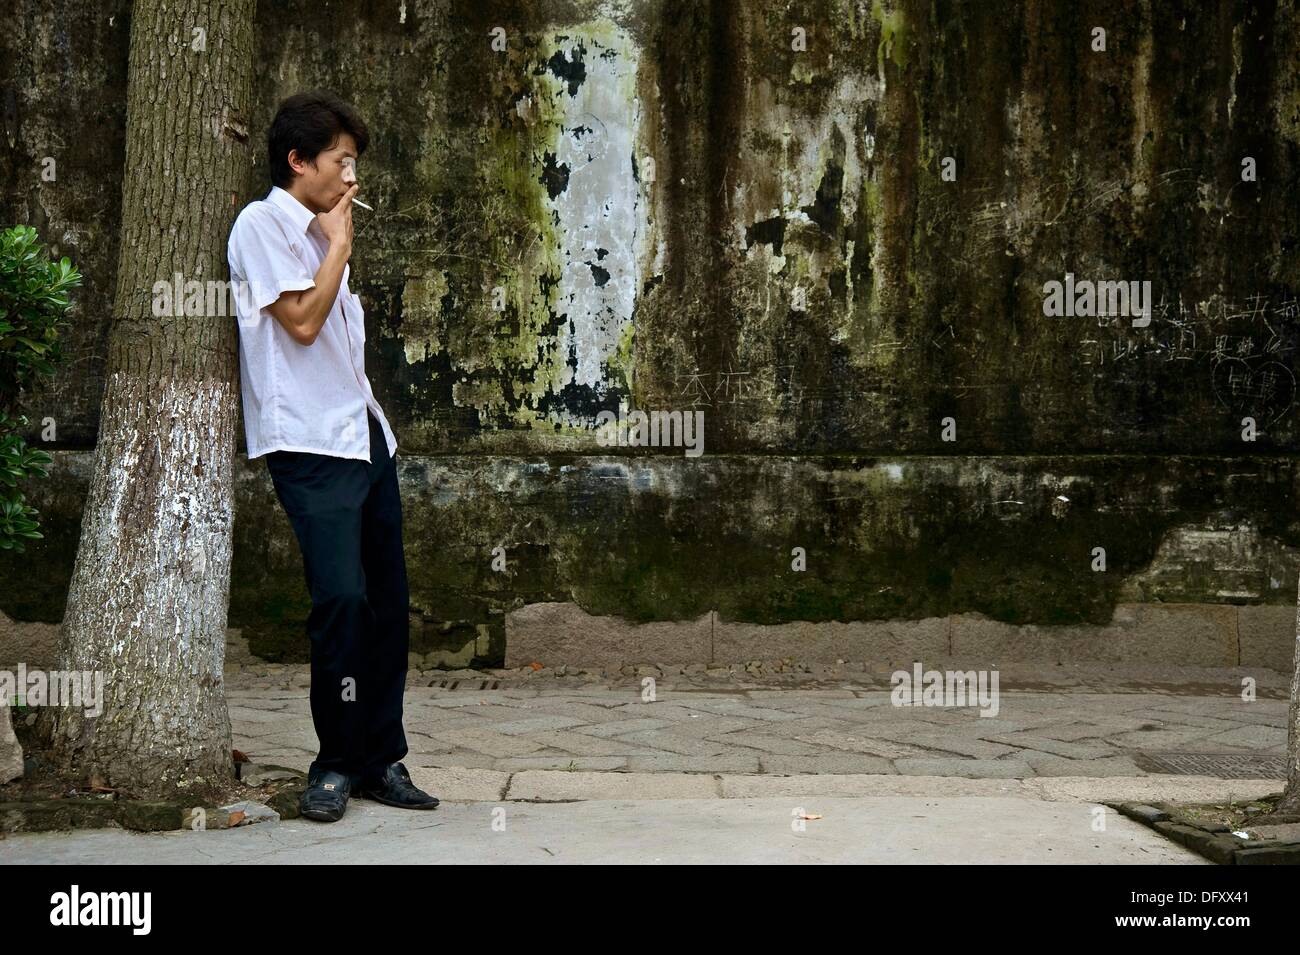 Man leaning against a tree smoking, China Stock Photo - Alamy